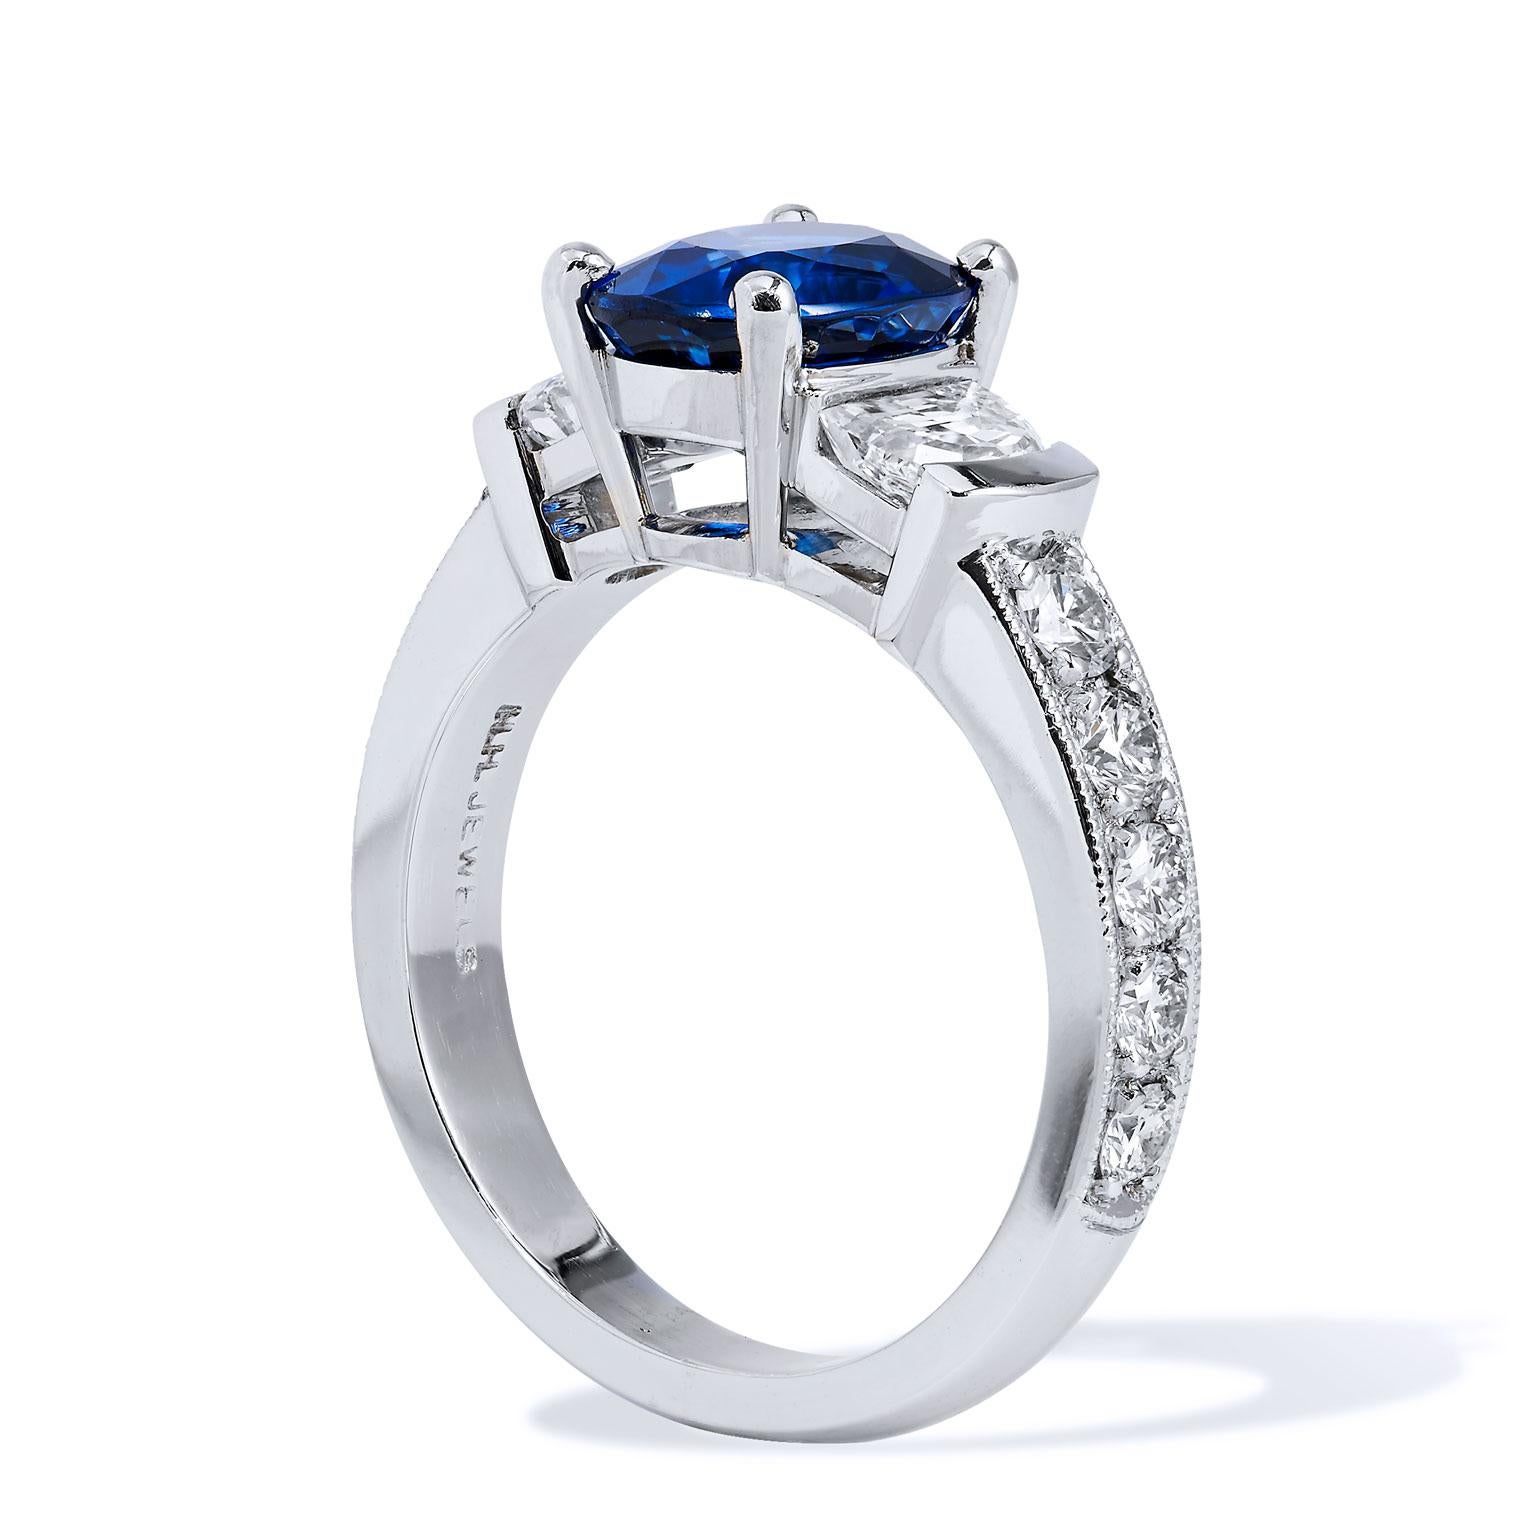 GIA Certified 2.45 Carat Blue Sapphire Diamond Ring Handmade 

This stunning blue sapphire and diamond ring is handmade and one of a kind. 
It features a 2.45 carat blue sapphire which measures (8.79mm x 6.88mm). 
This sapphire is GIA certified. The